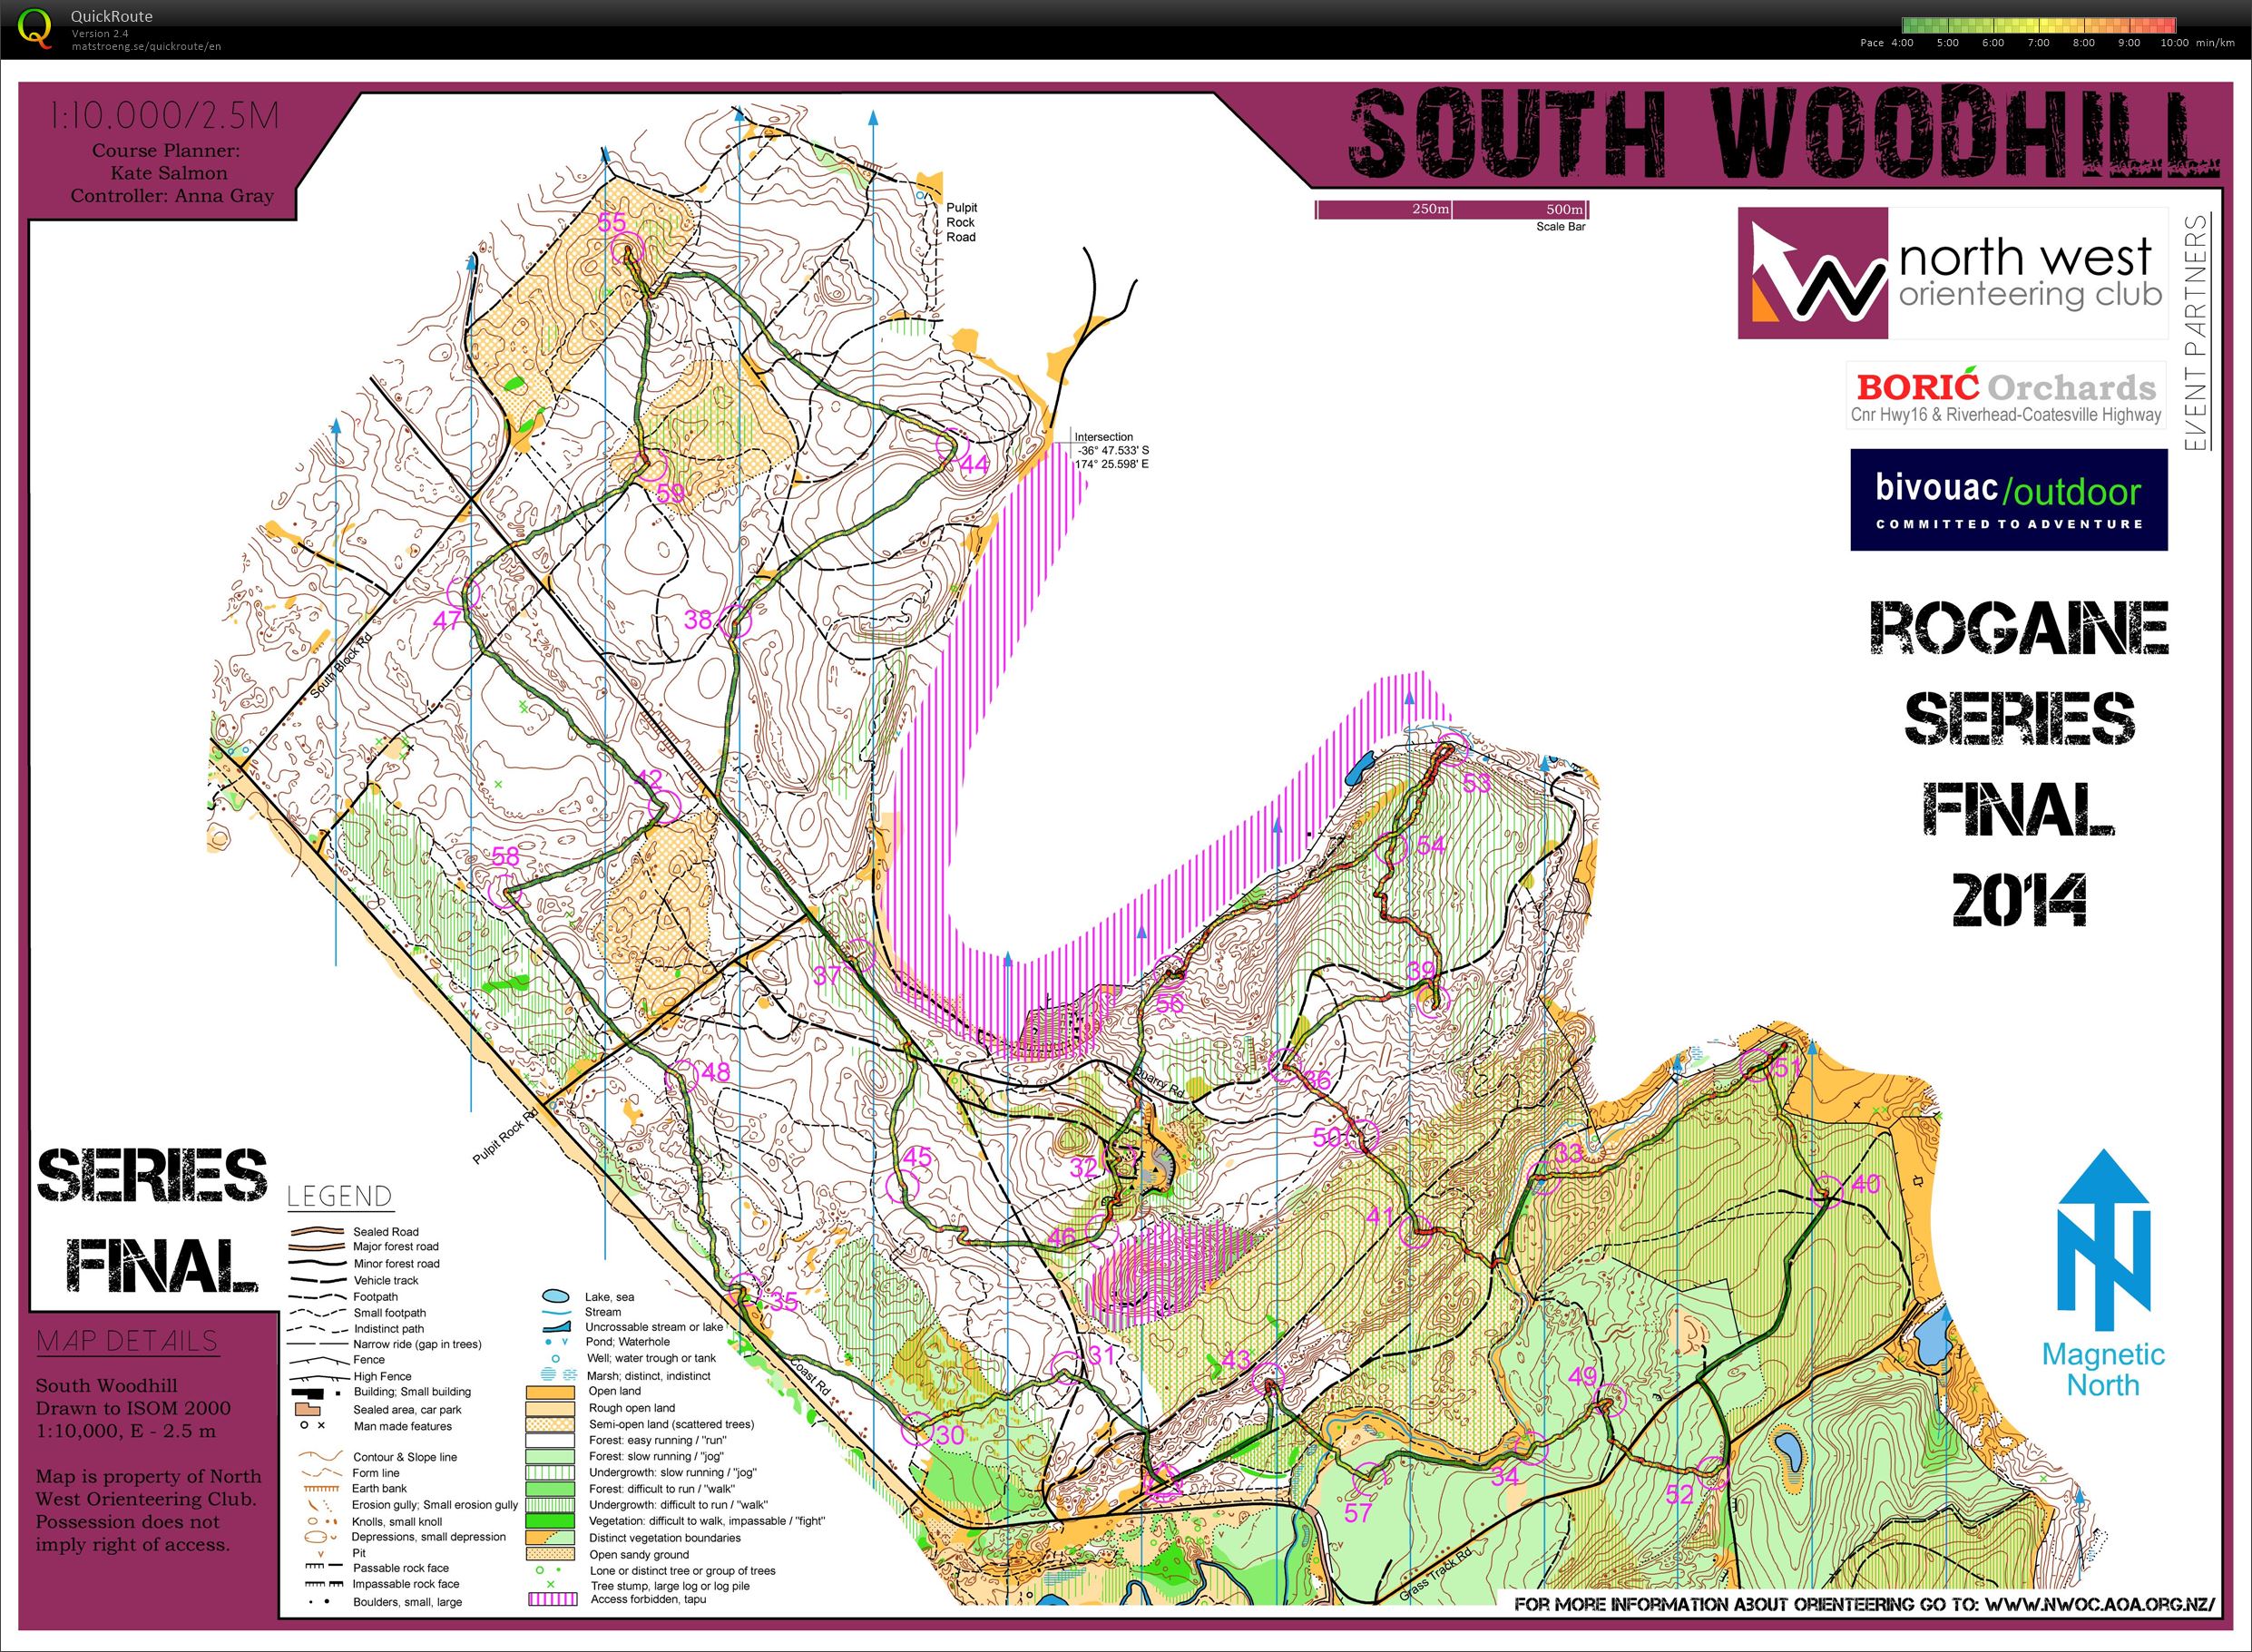 Rogaine Series - Part 4 - South Woodhill (08.06.2014)